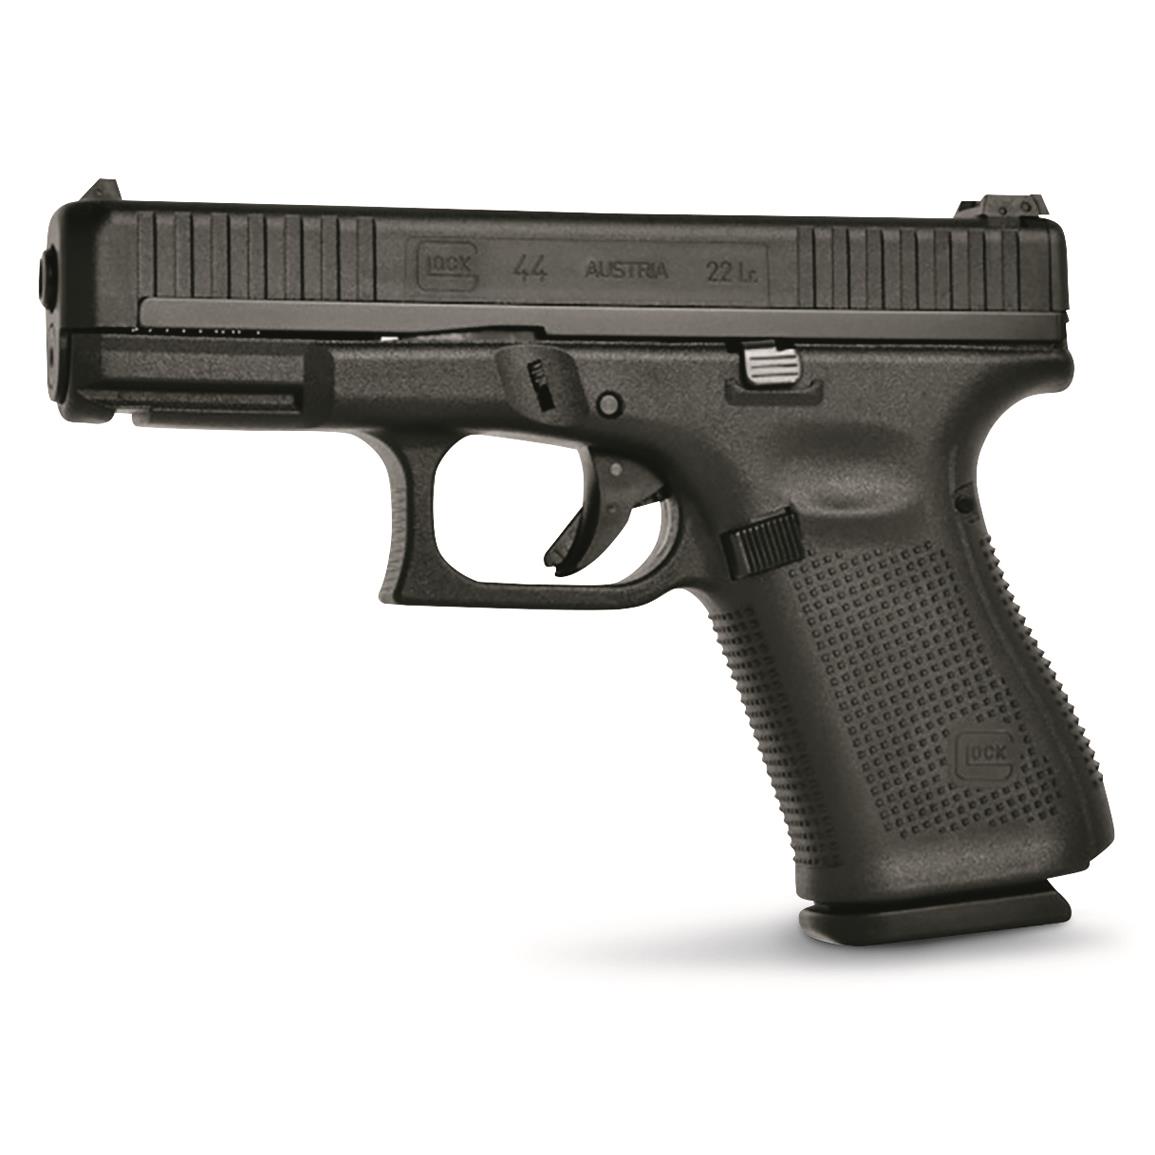 The G44 looks like other GLOCKs, but it is a .22 LR.